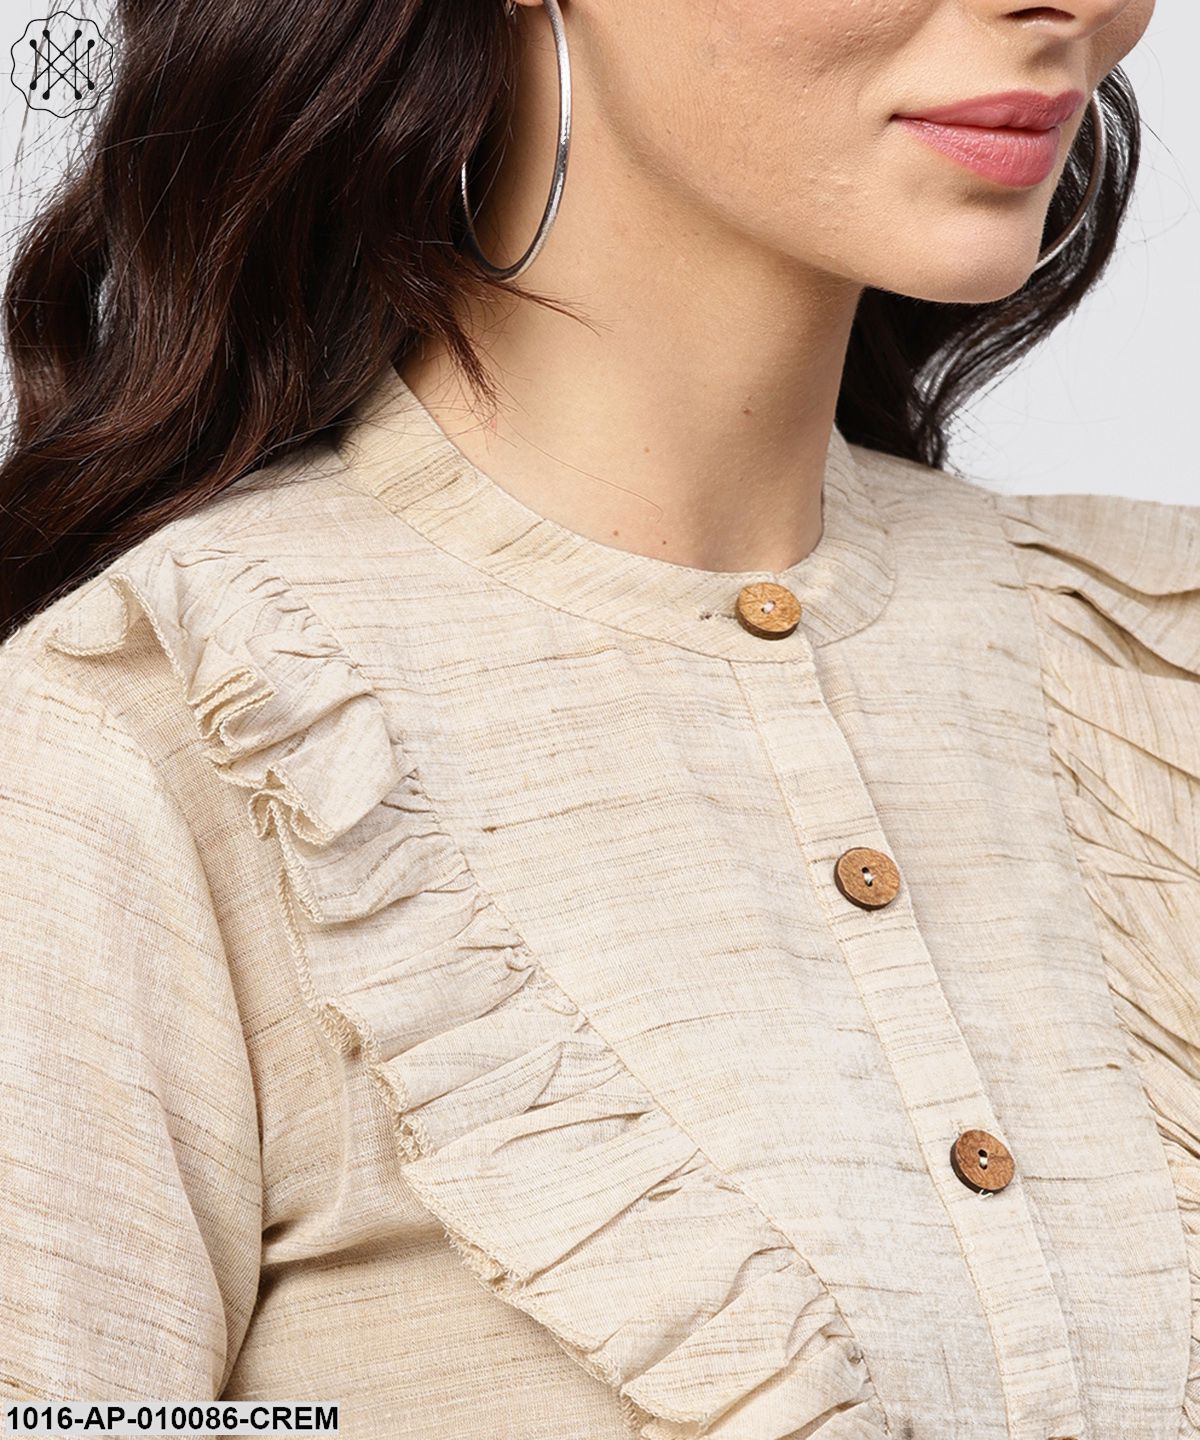 Ruffled Yoke With Open Center Placket Top With Pleated Sleeves And Madarin Collar